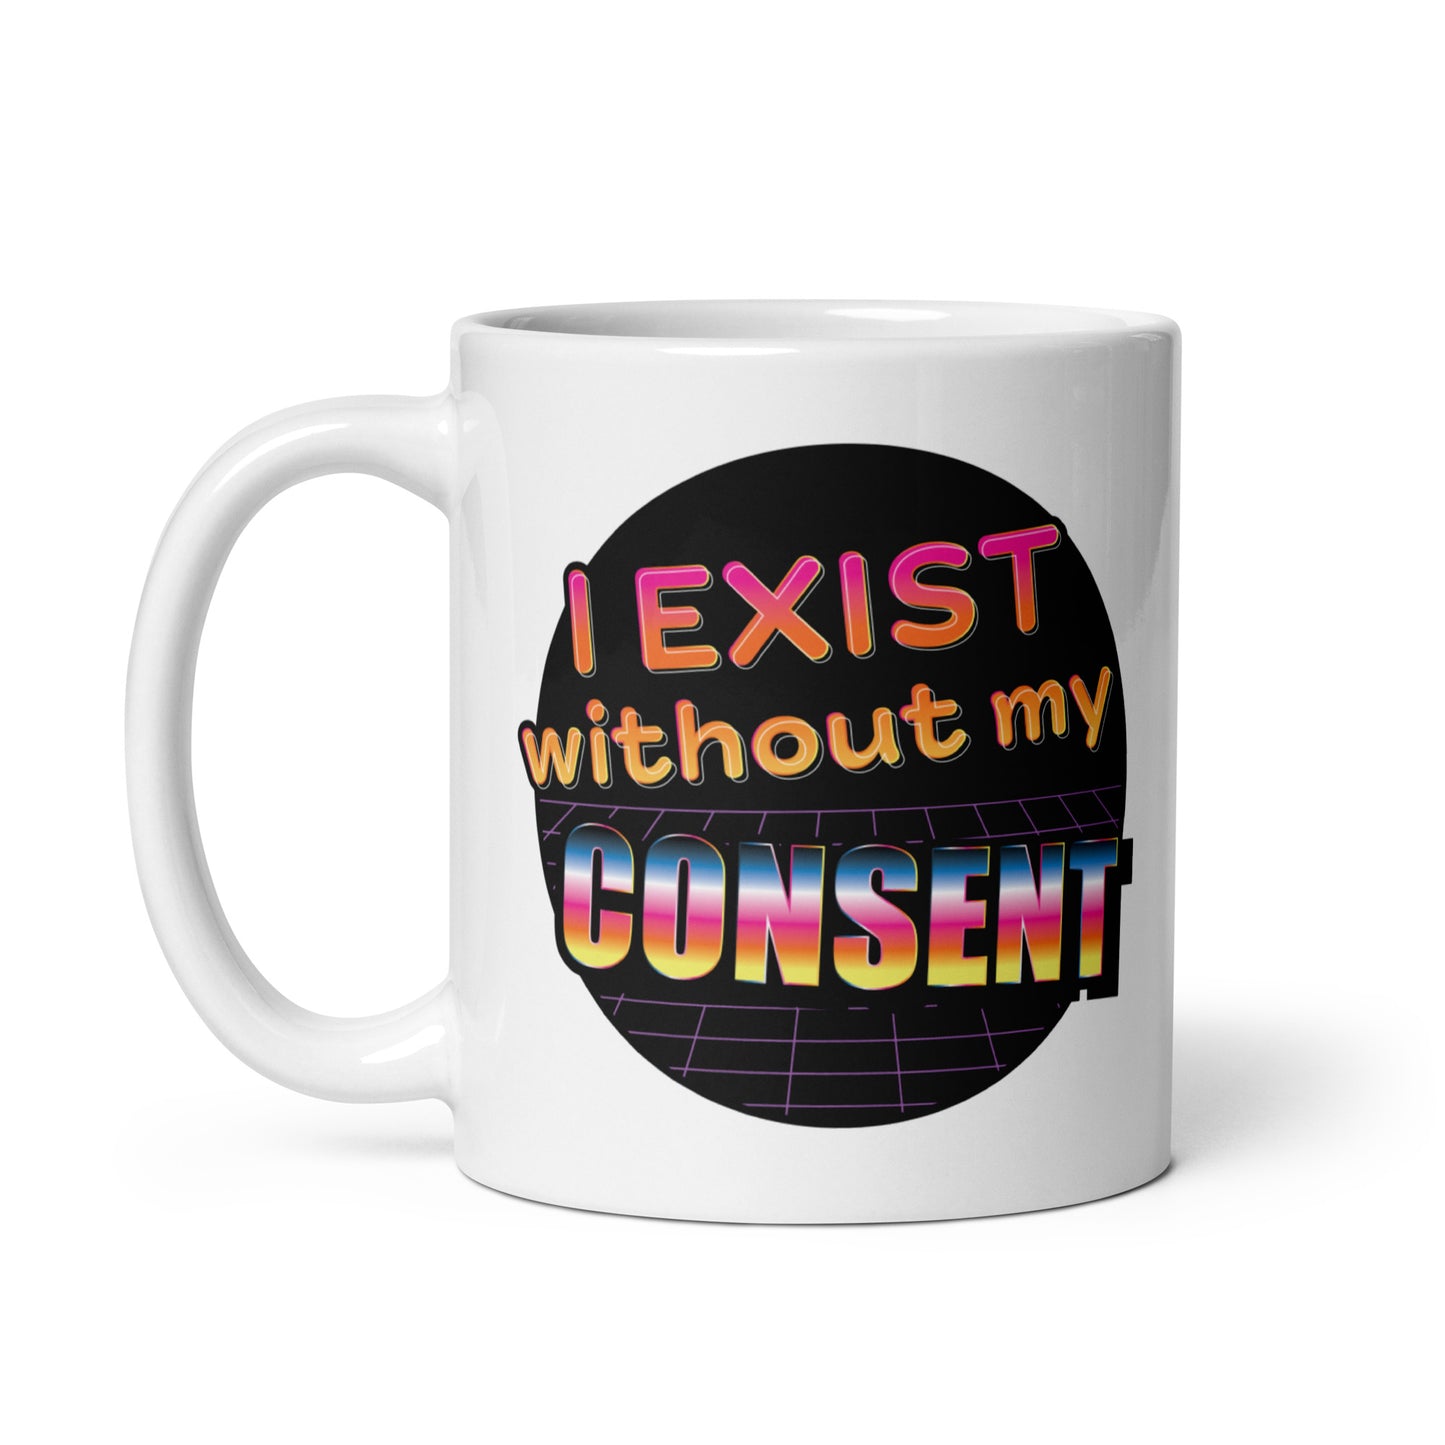 A white 11 ounce ceramic mug featuring a brightly colored 80's style graphic with colorful text that reads "I exist without my consent"